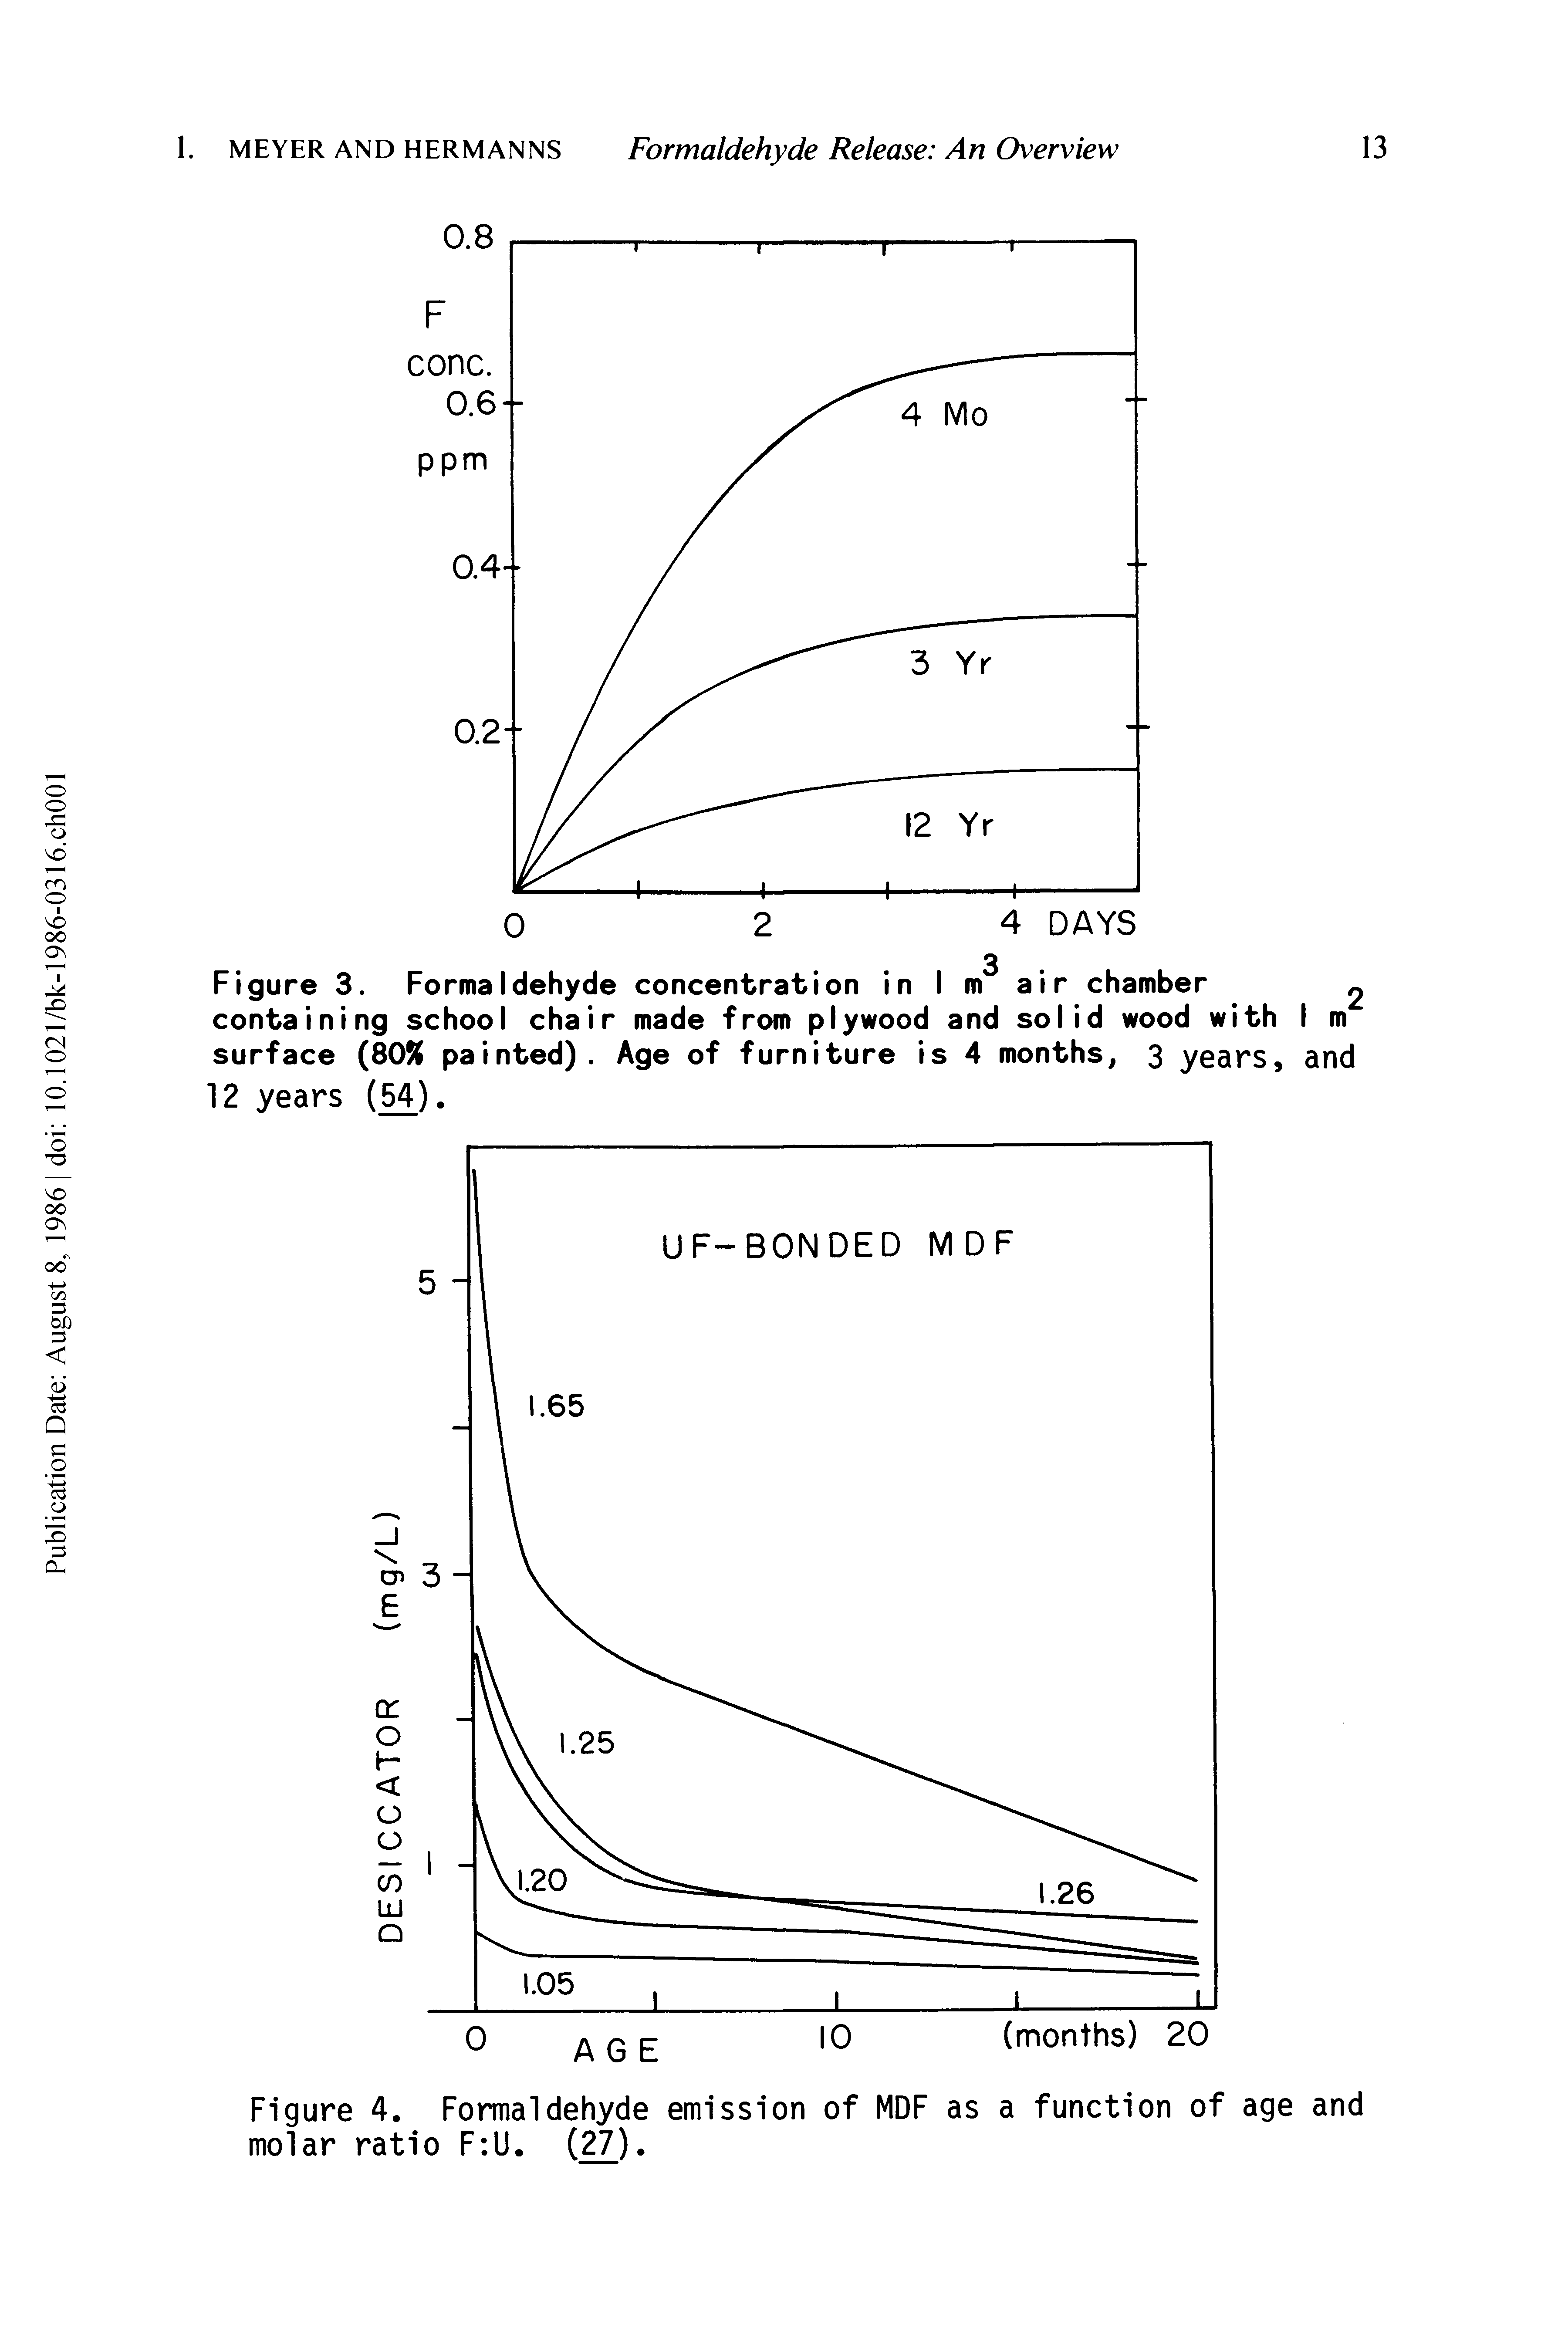 Figure 4. Formaldehyde emission of MDF as a function of age and molar ratio F U. (27).